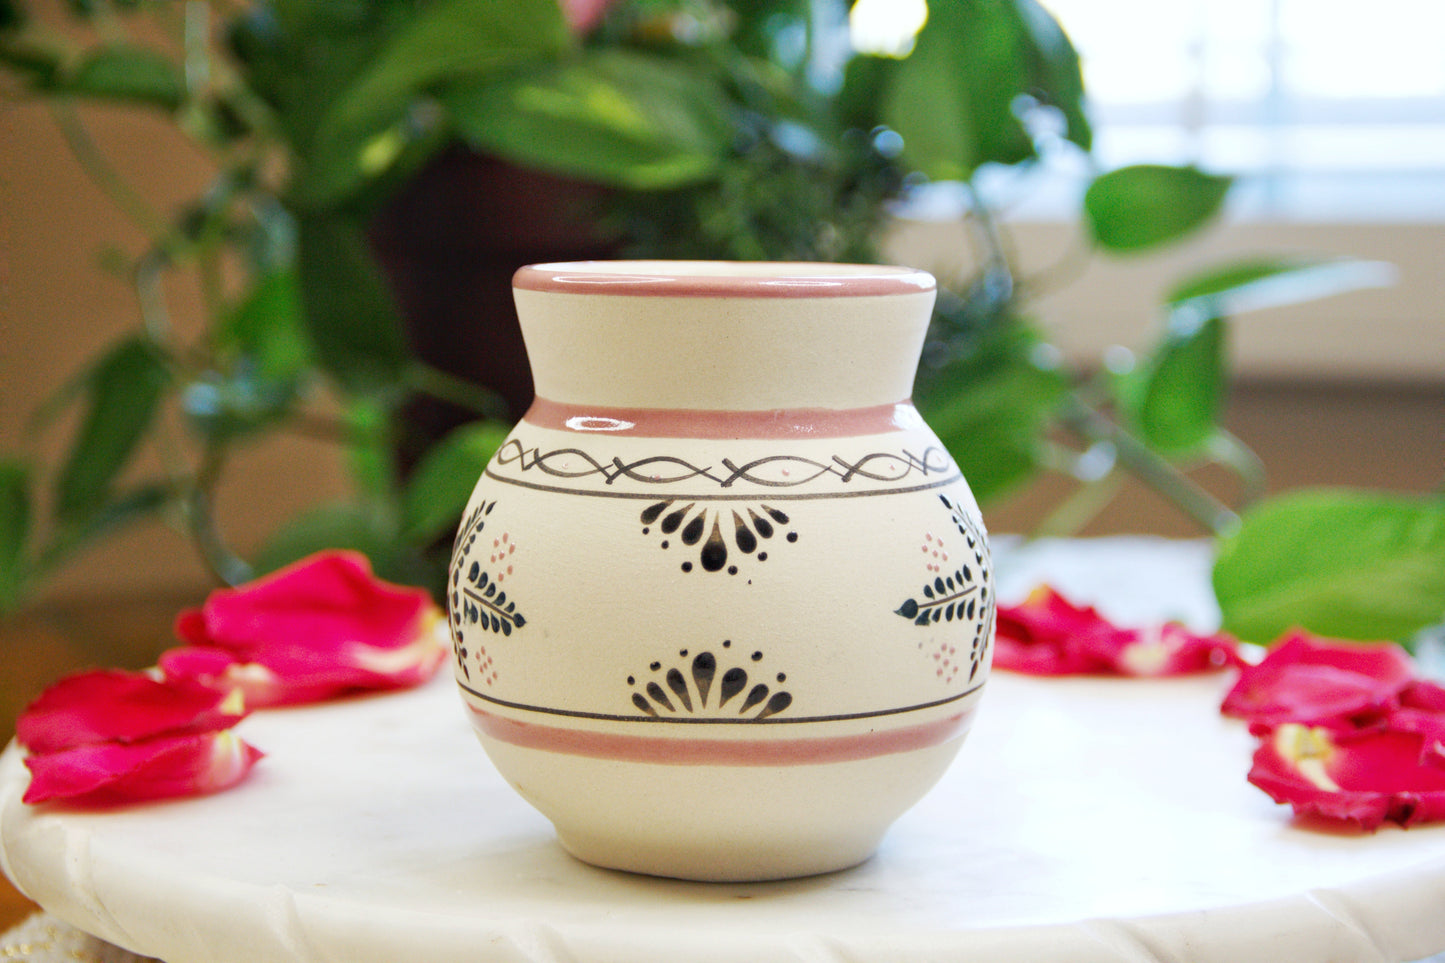 side view of a handmade artisanal in a red floral design mug. Custom made by Artisan in Mexico.